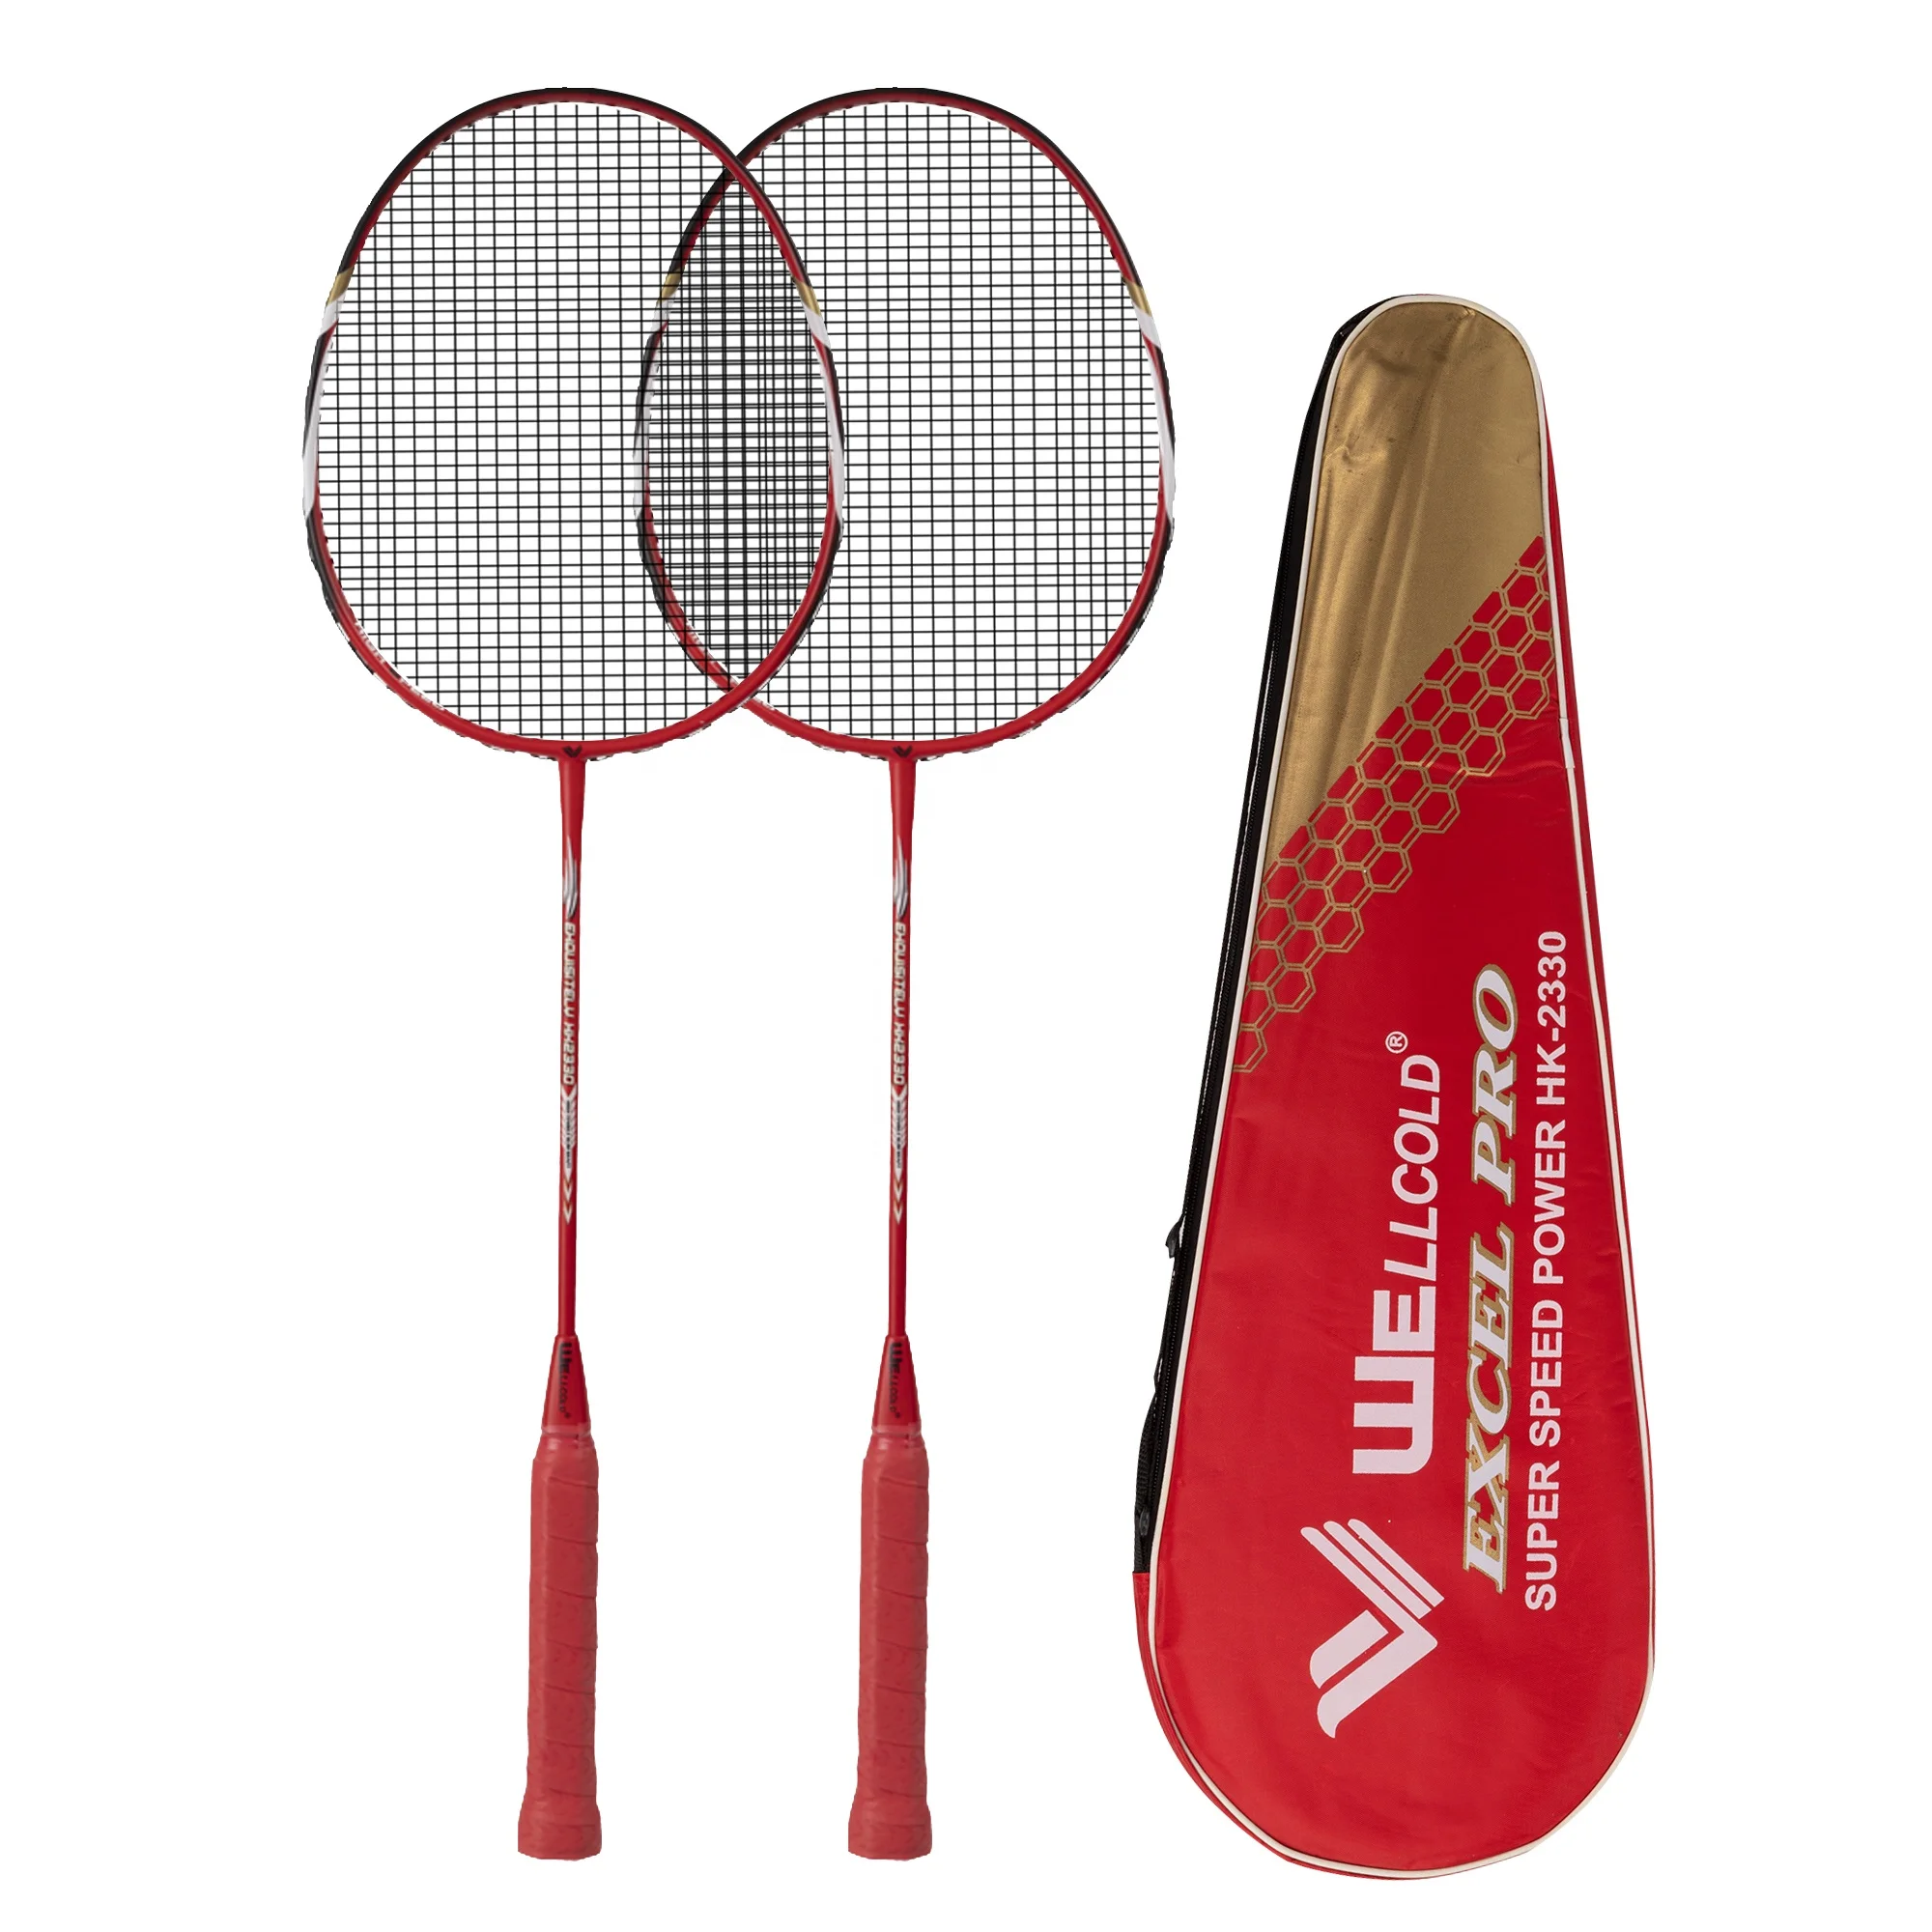 Wholesale Stock product strong carbon fiber badminton racket manufacturer for wholesale From m.alibaba